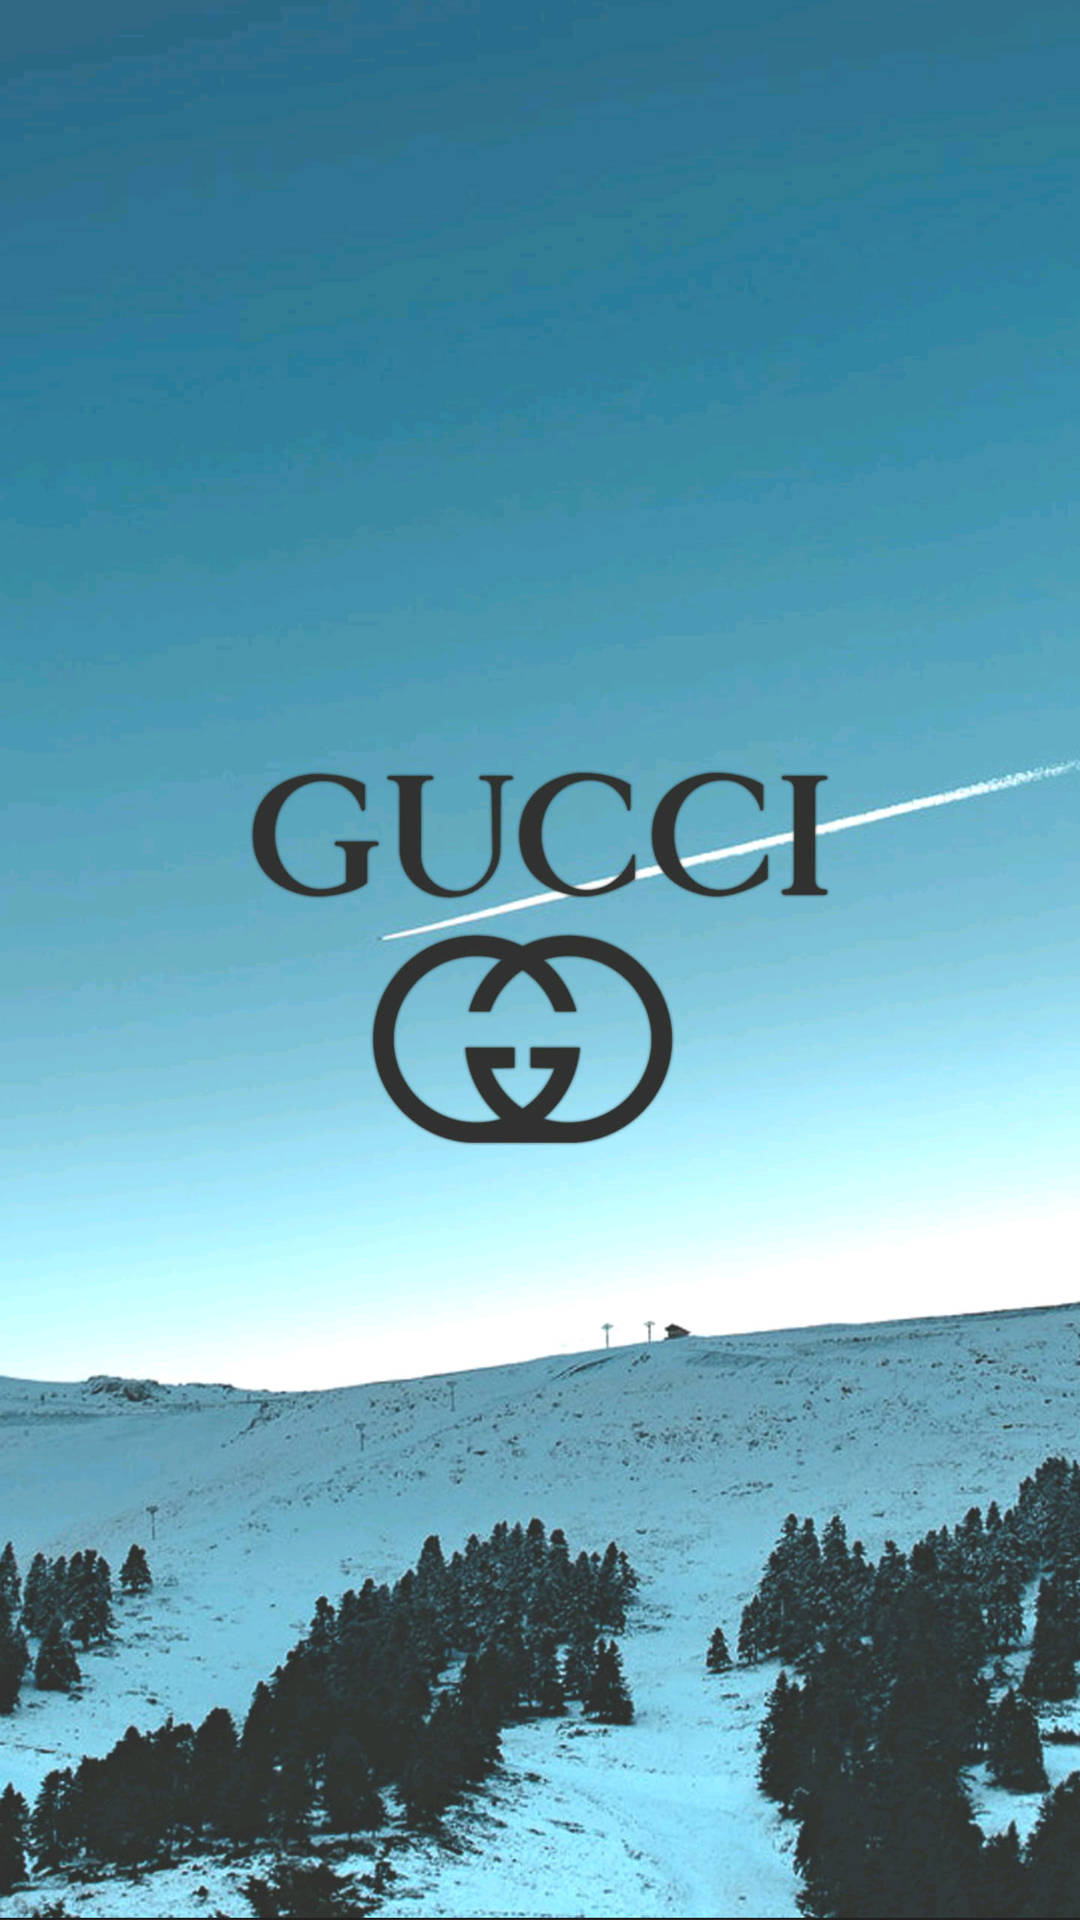 Snowy Gucci Iphone Background Background